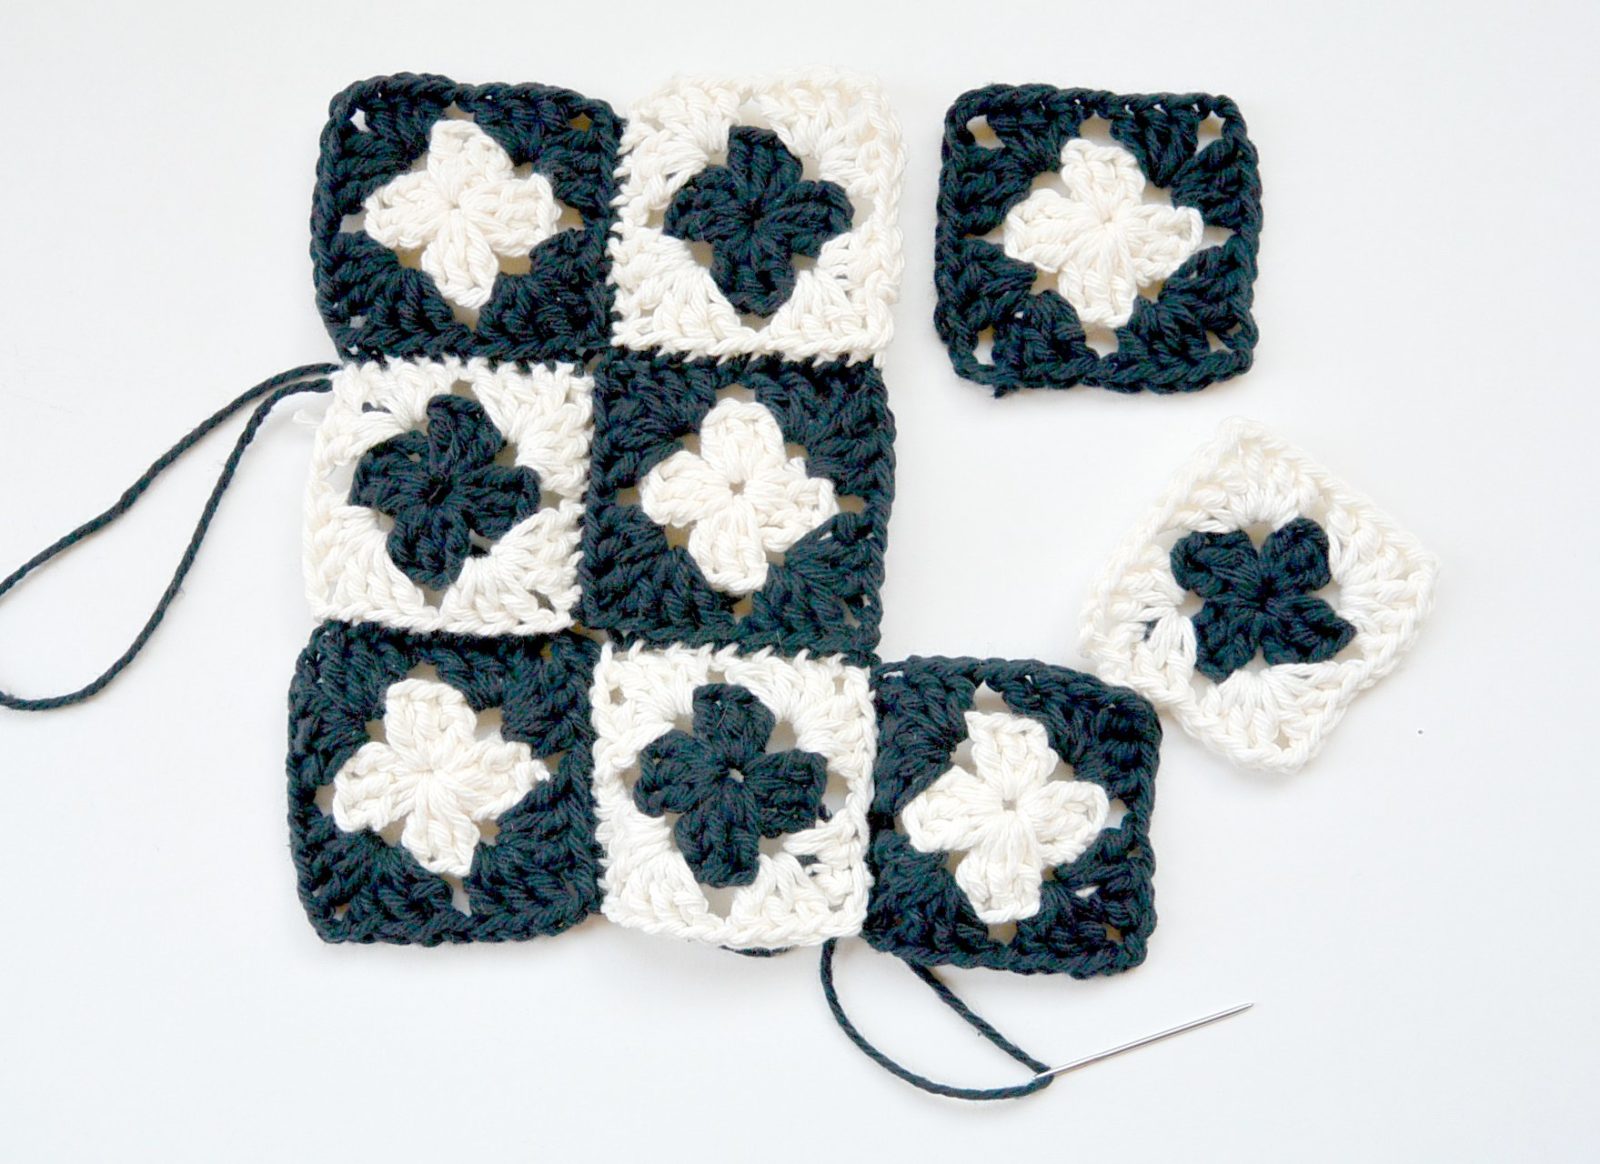 Stitching 9 crocheted granny squares together to form a potholder